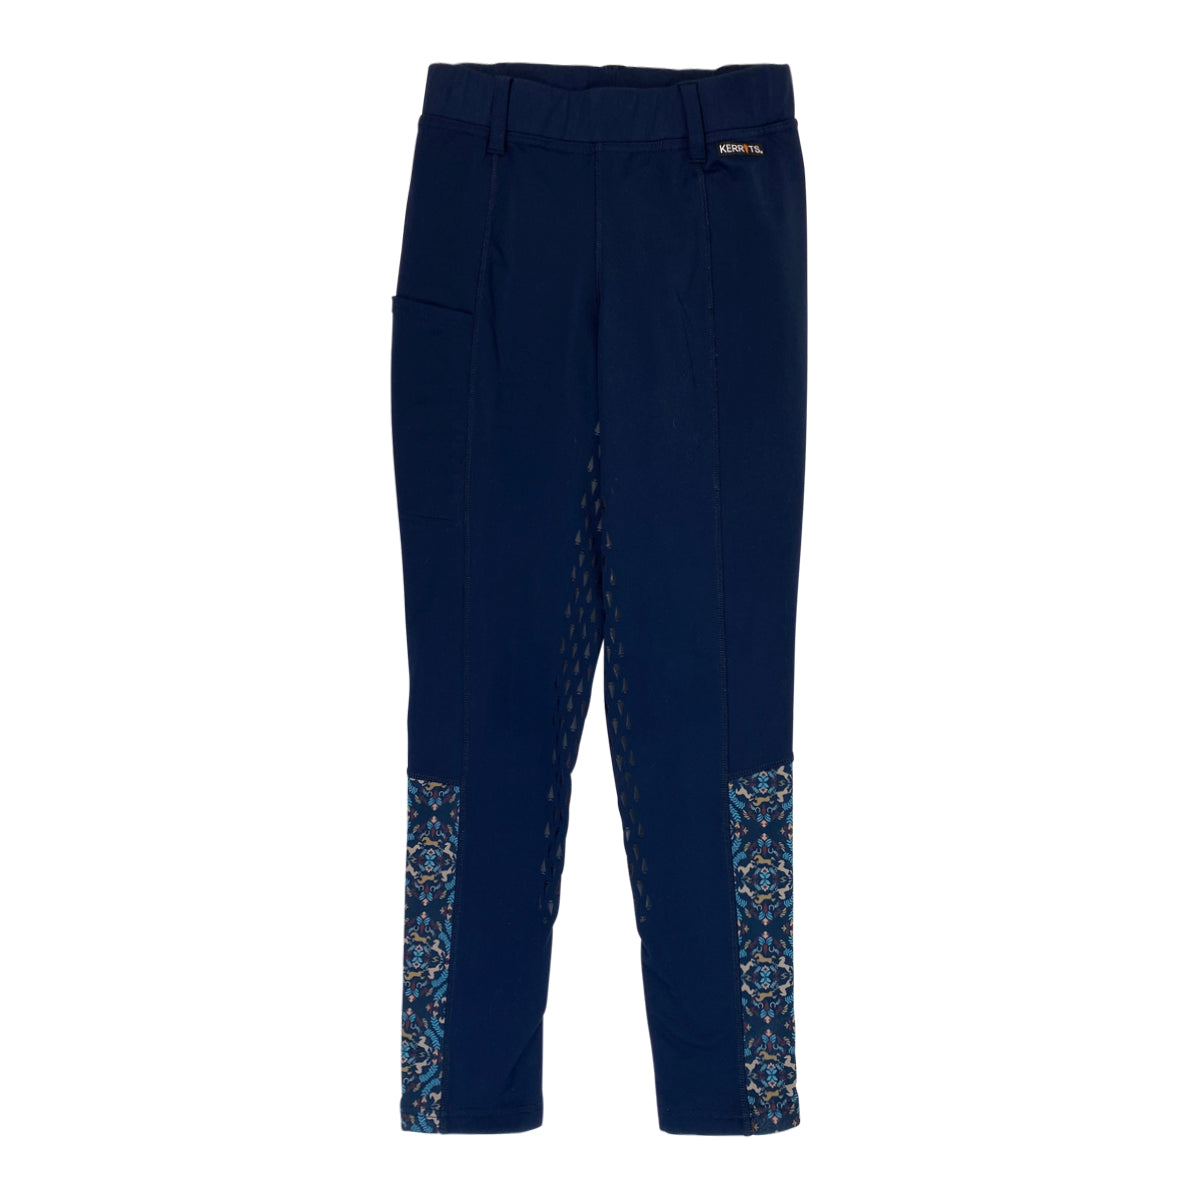 Kerrits 'Thermo Tech' Winter Tight in Navy